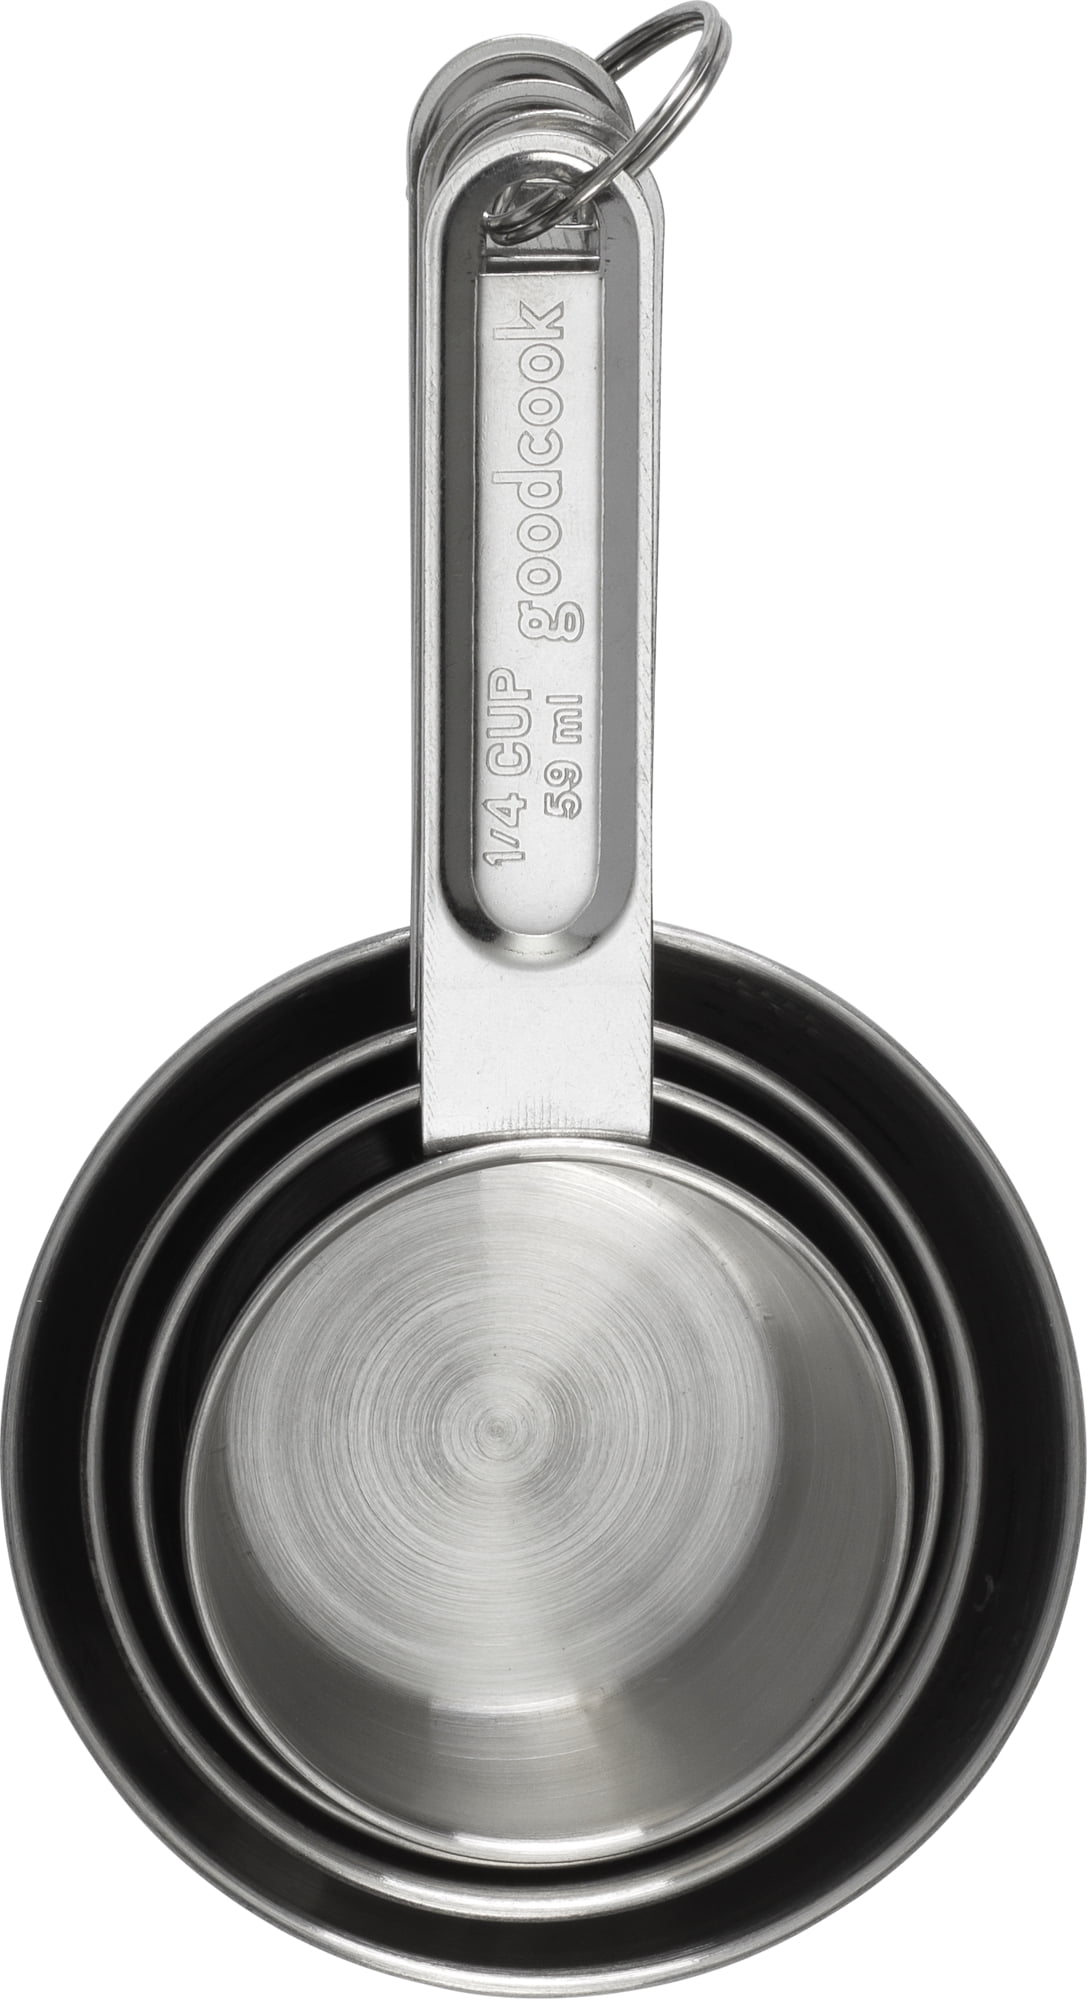 13 Best Measuring Cups for 2018 - Stainless Steel, Glass, and